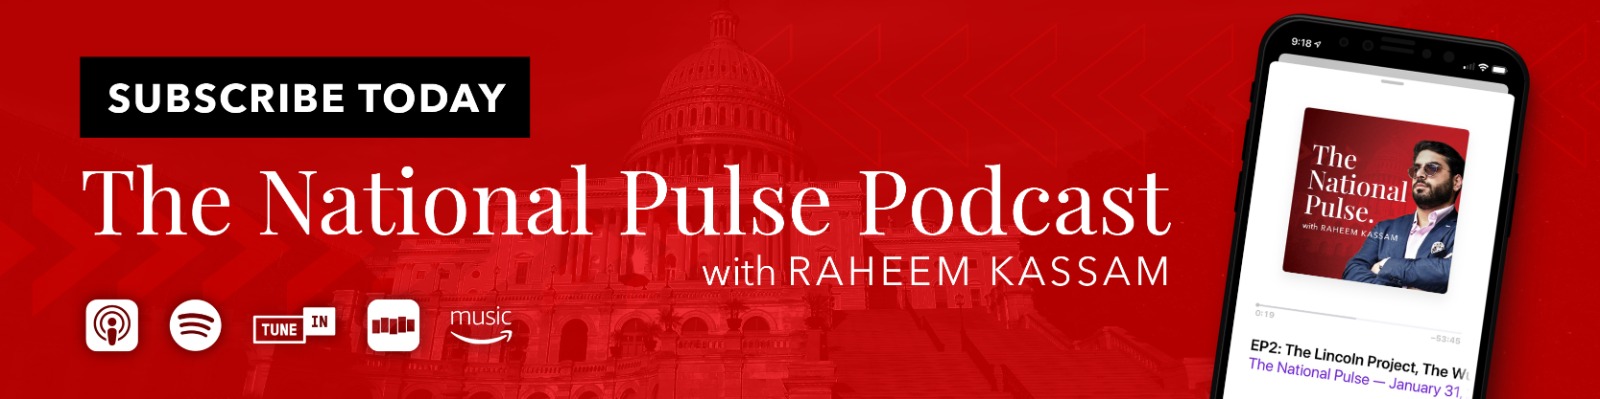 The National Pulse Podcast